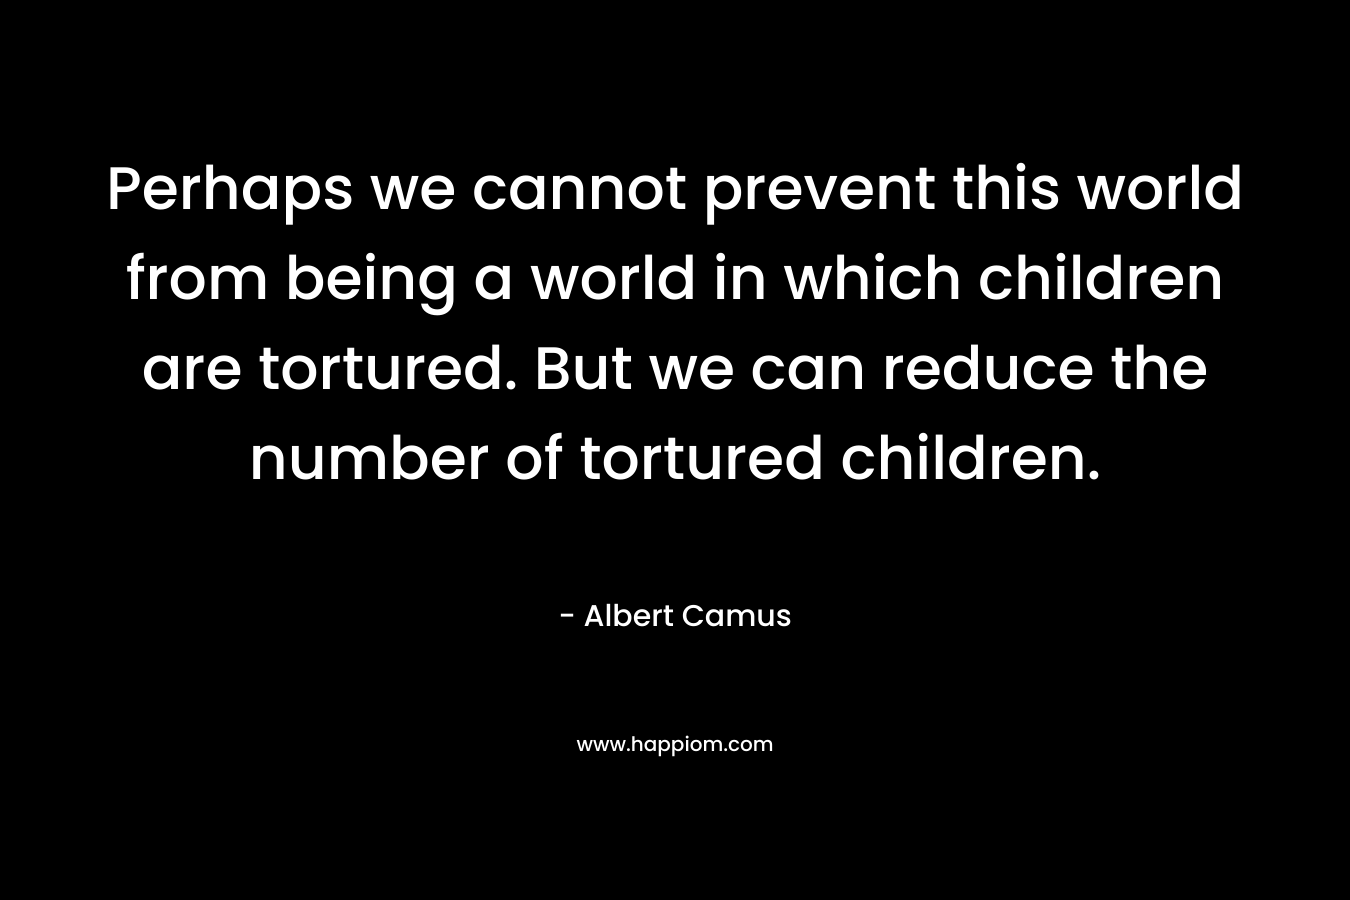 Perhaps we cannot prevent this world from being a world in which children are tortured. But we can reduce the number of tortured children.